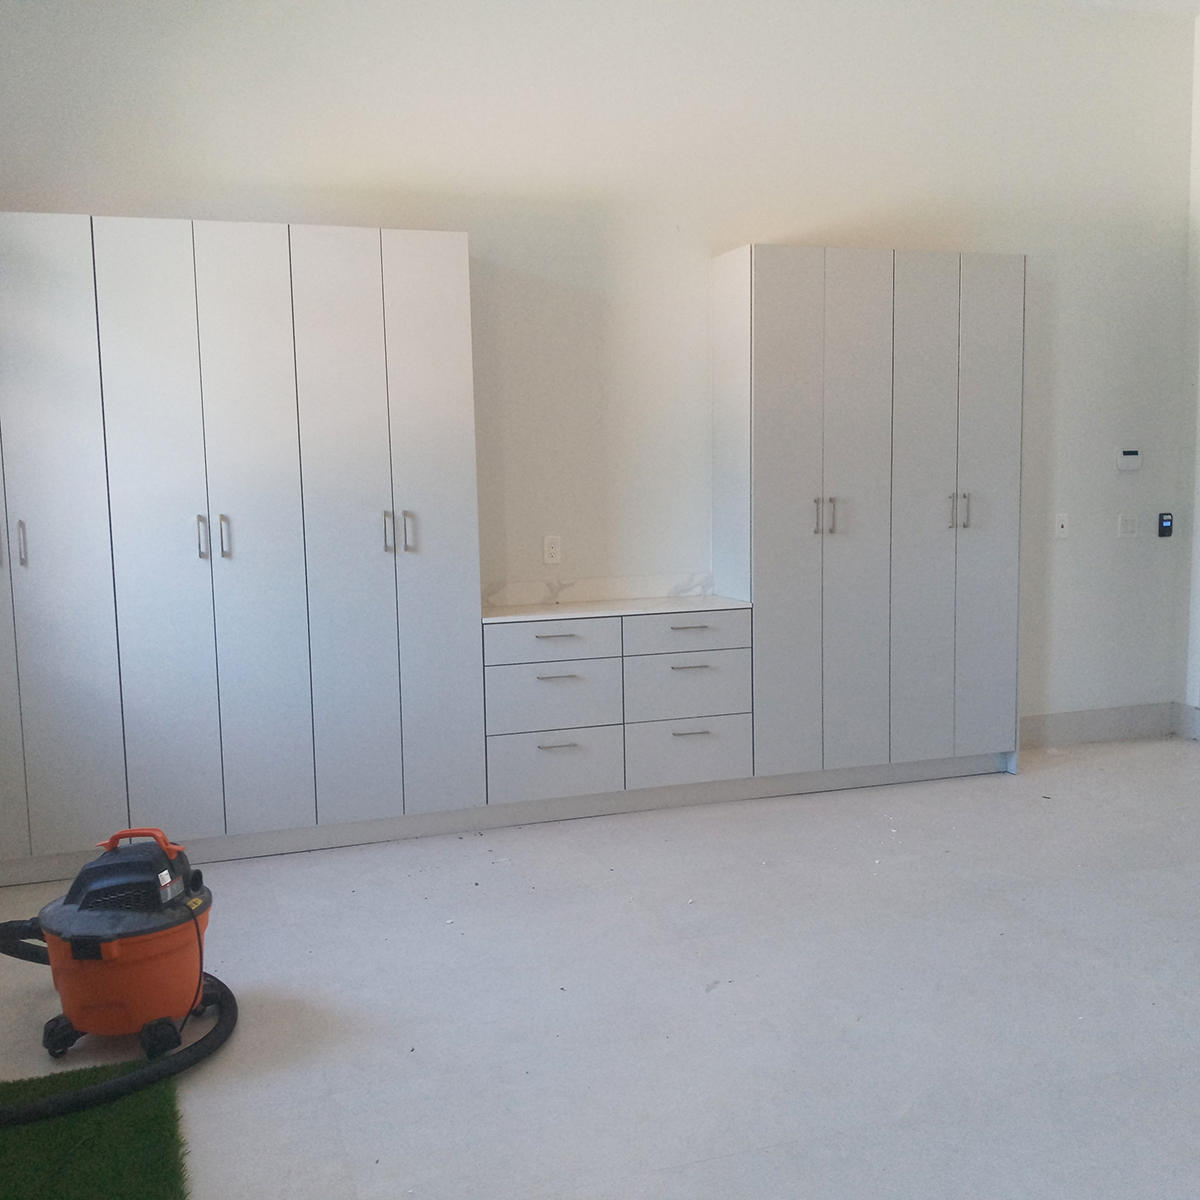 305-CAB-INET- bedroom cabinets